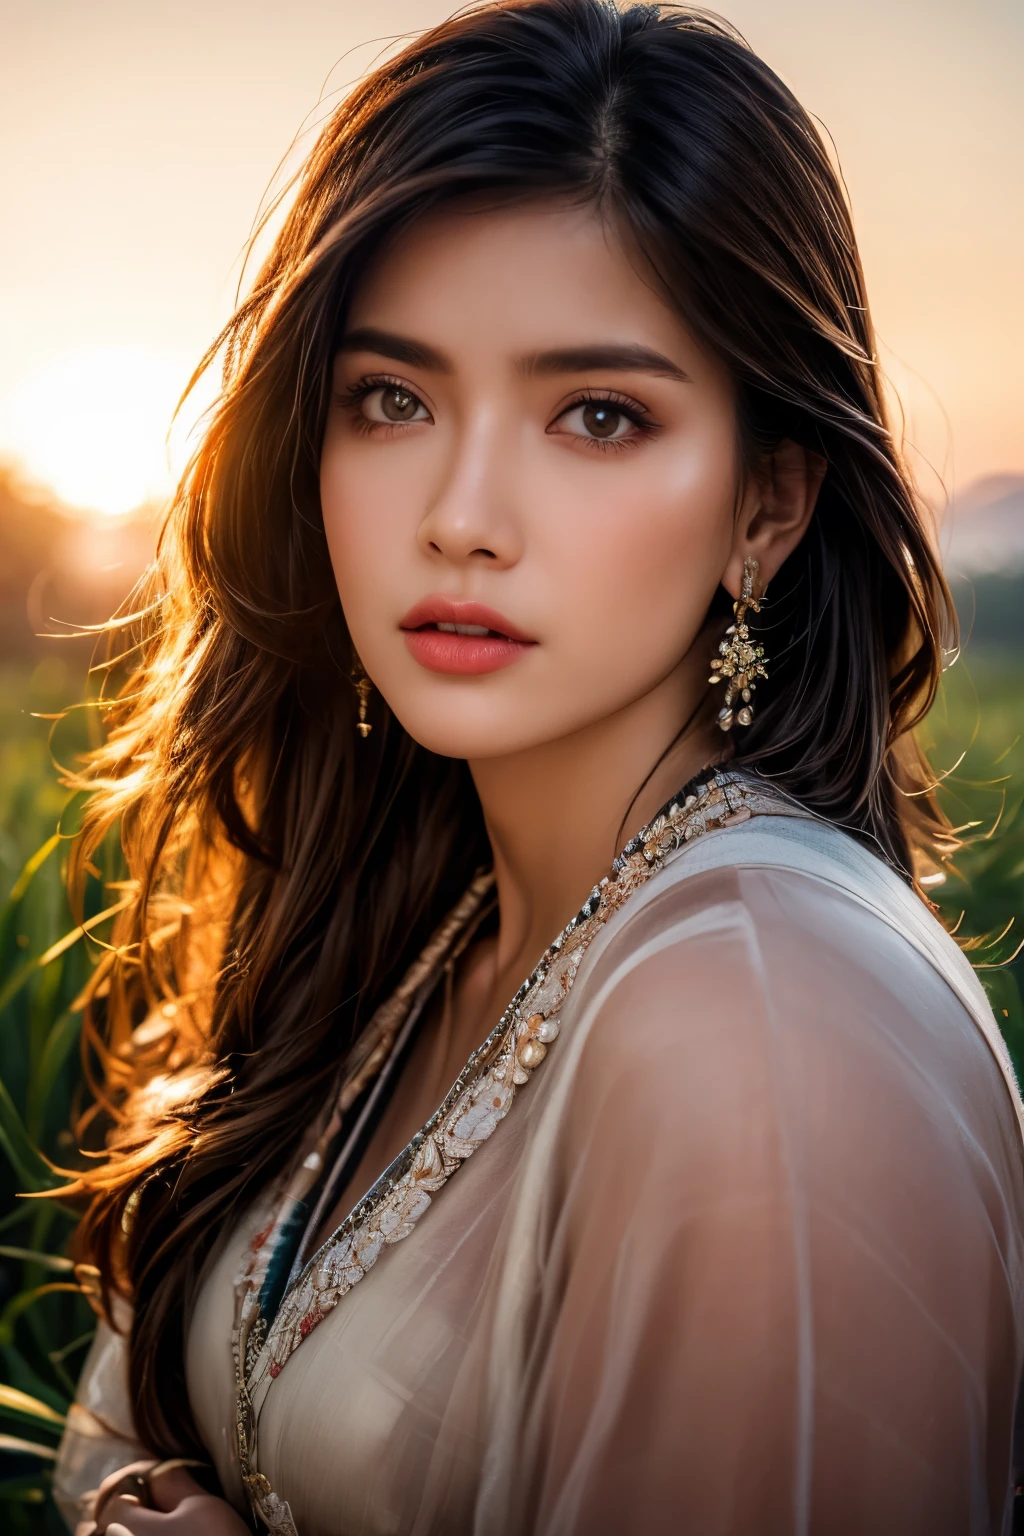 ((majestic:1.5)), ((hyper realistic:1.5)), uhd:1.3, RAw photo, intricately detailed, beautiful sunrise over rice fields in India, Indian farmers harvesting rice, beautiful detailed eyes, beautiful detailed lips, extremely detailed eyes and face, long eyelashes, traditional Indian clothing, serene rural landscape, golden hour lighting, warm color tones, soft focus, photorealistic, 8k, high resolution, masterpiece, ultra-detailed, professional photography, vibrant colors, natural lighting, cinematic composition